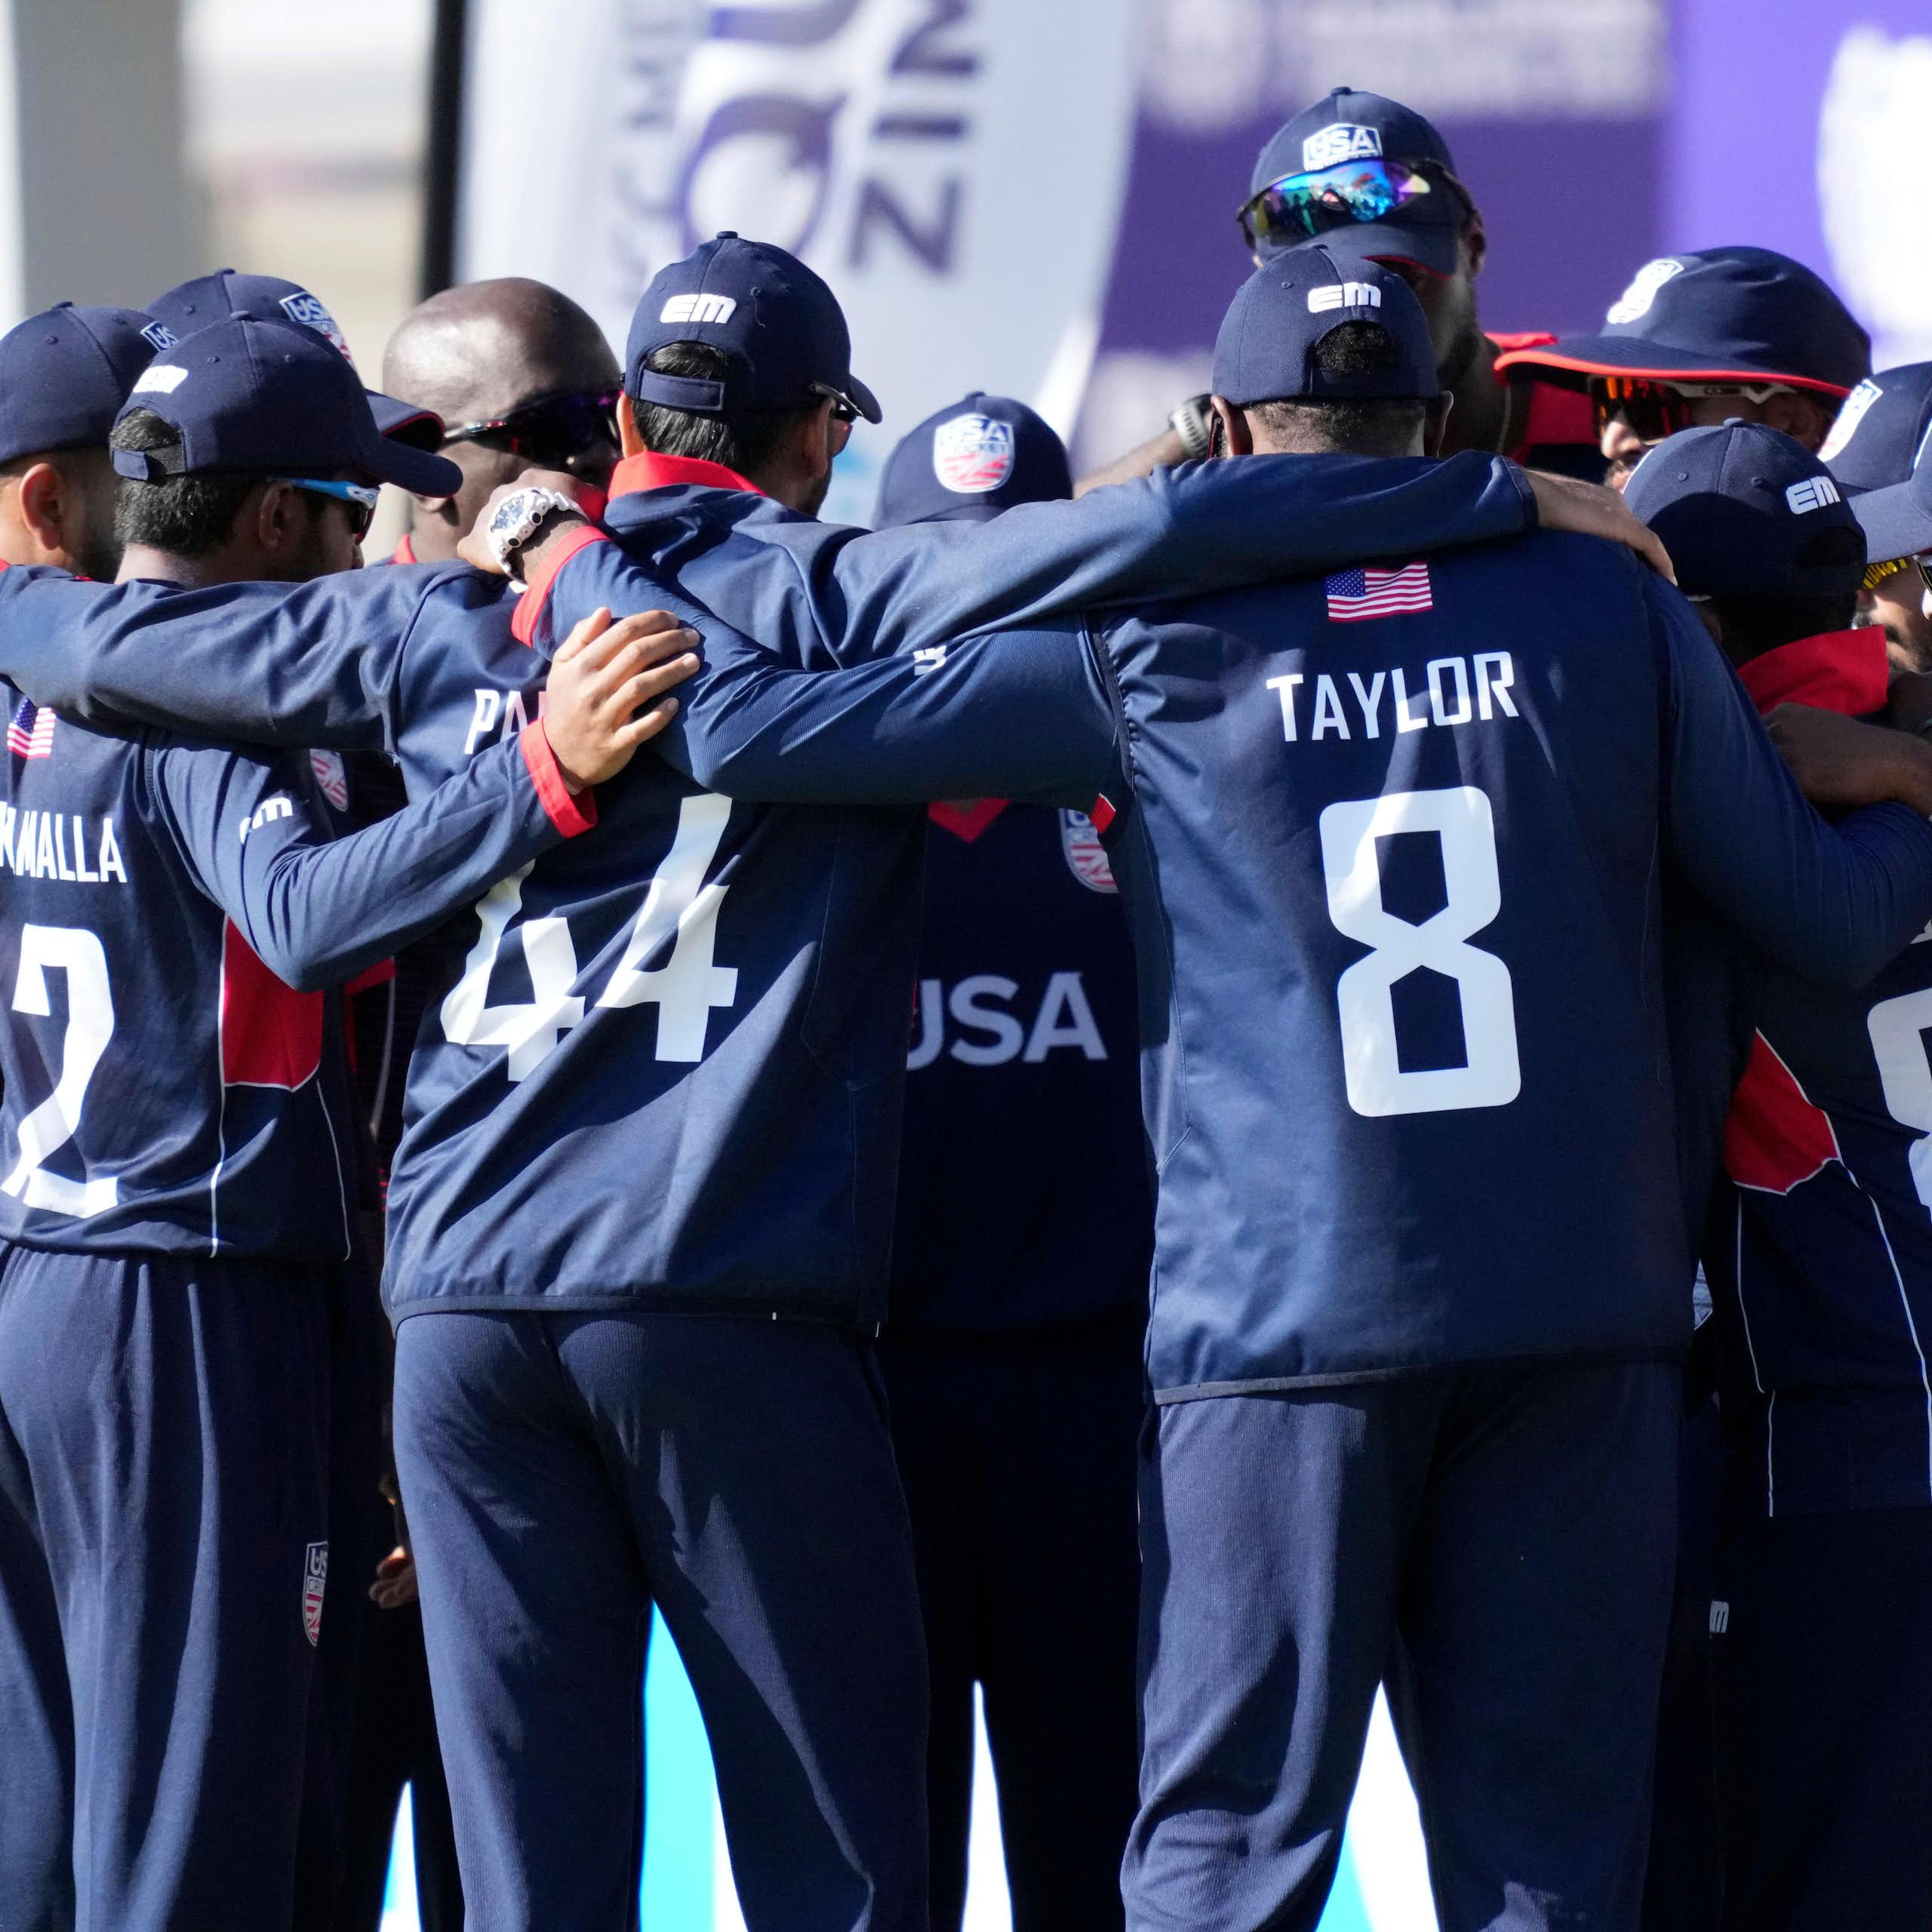 The men's USA cricket team gathered together in a huddle.